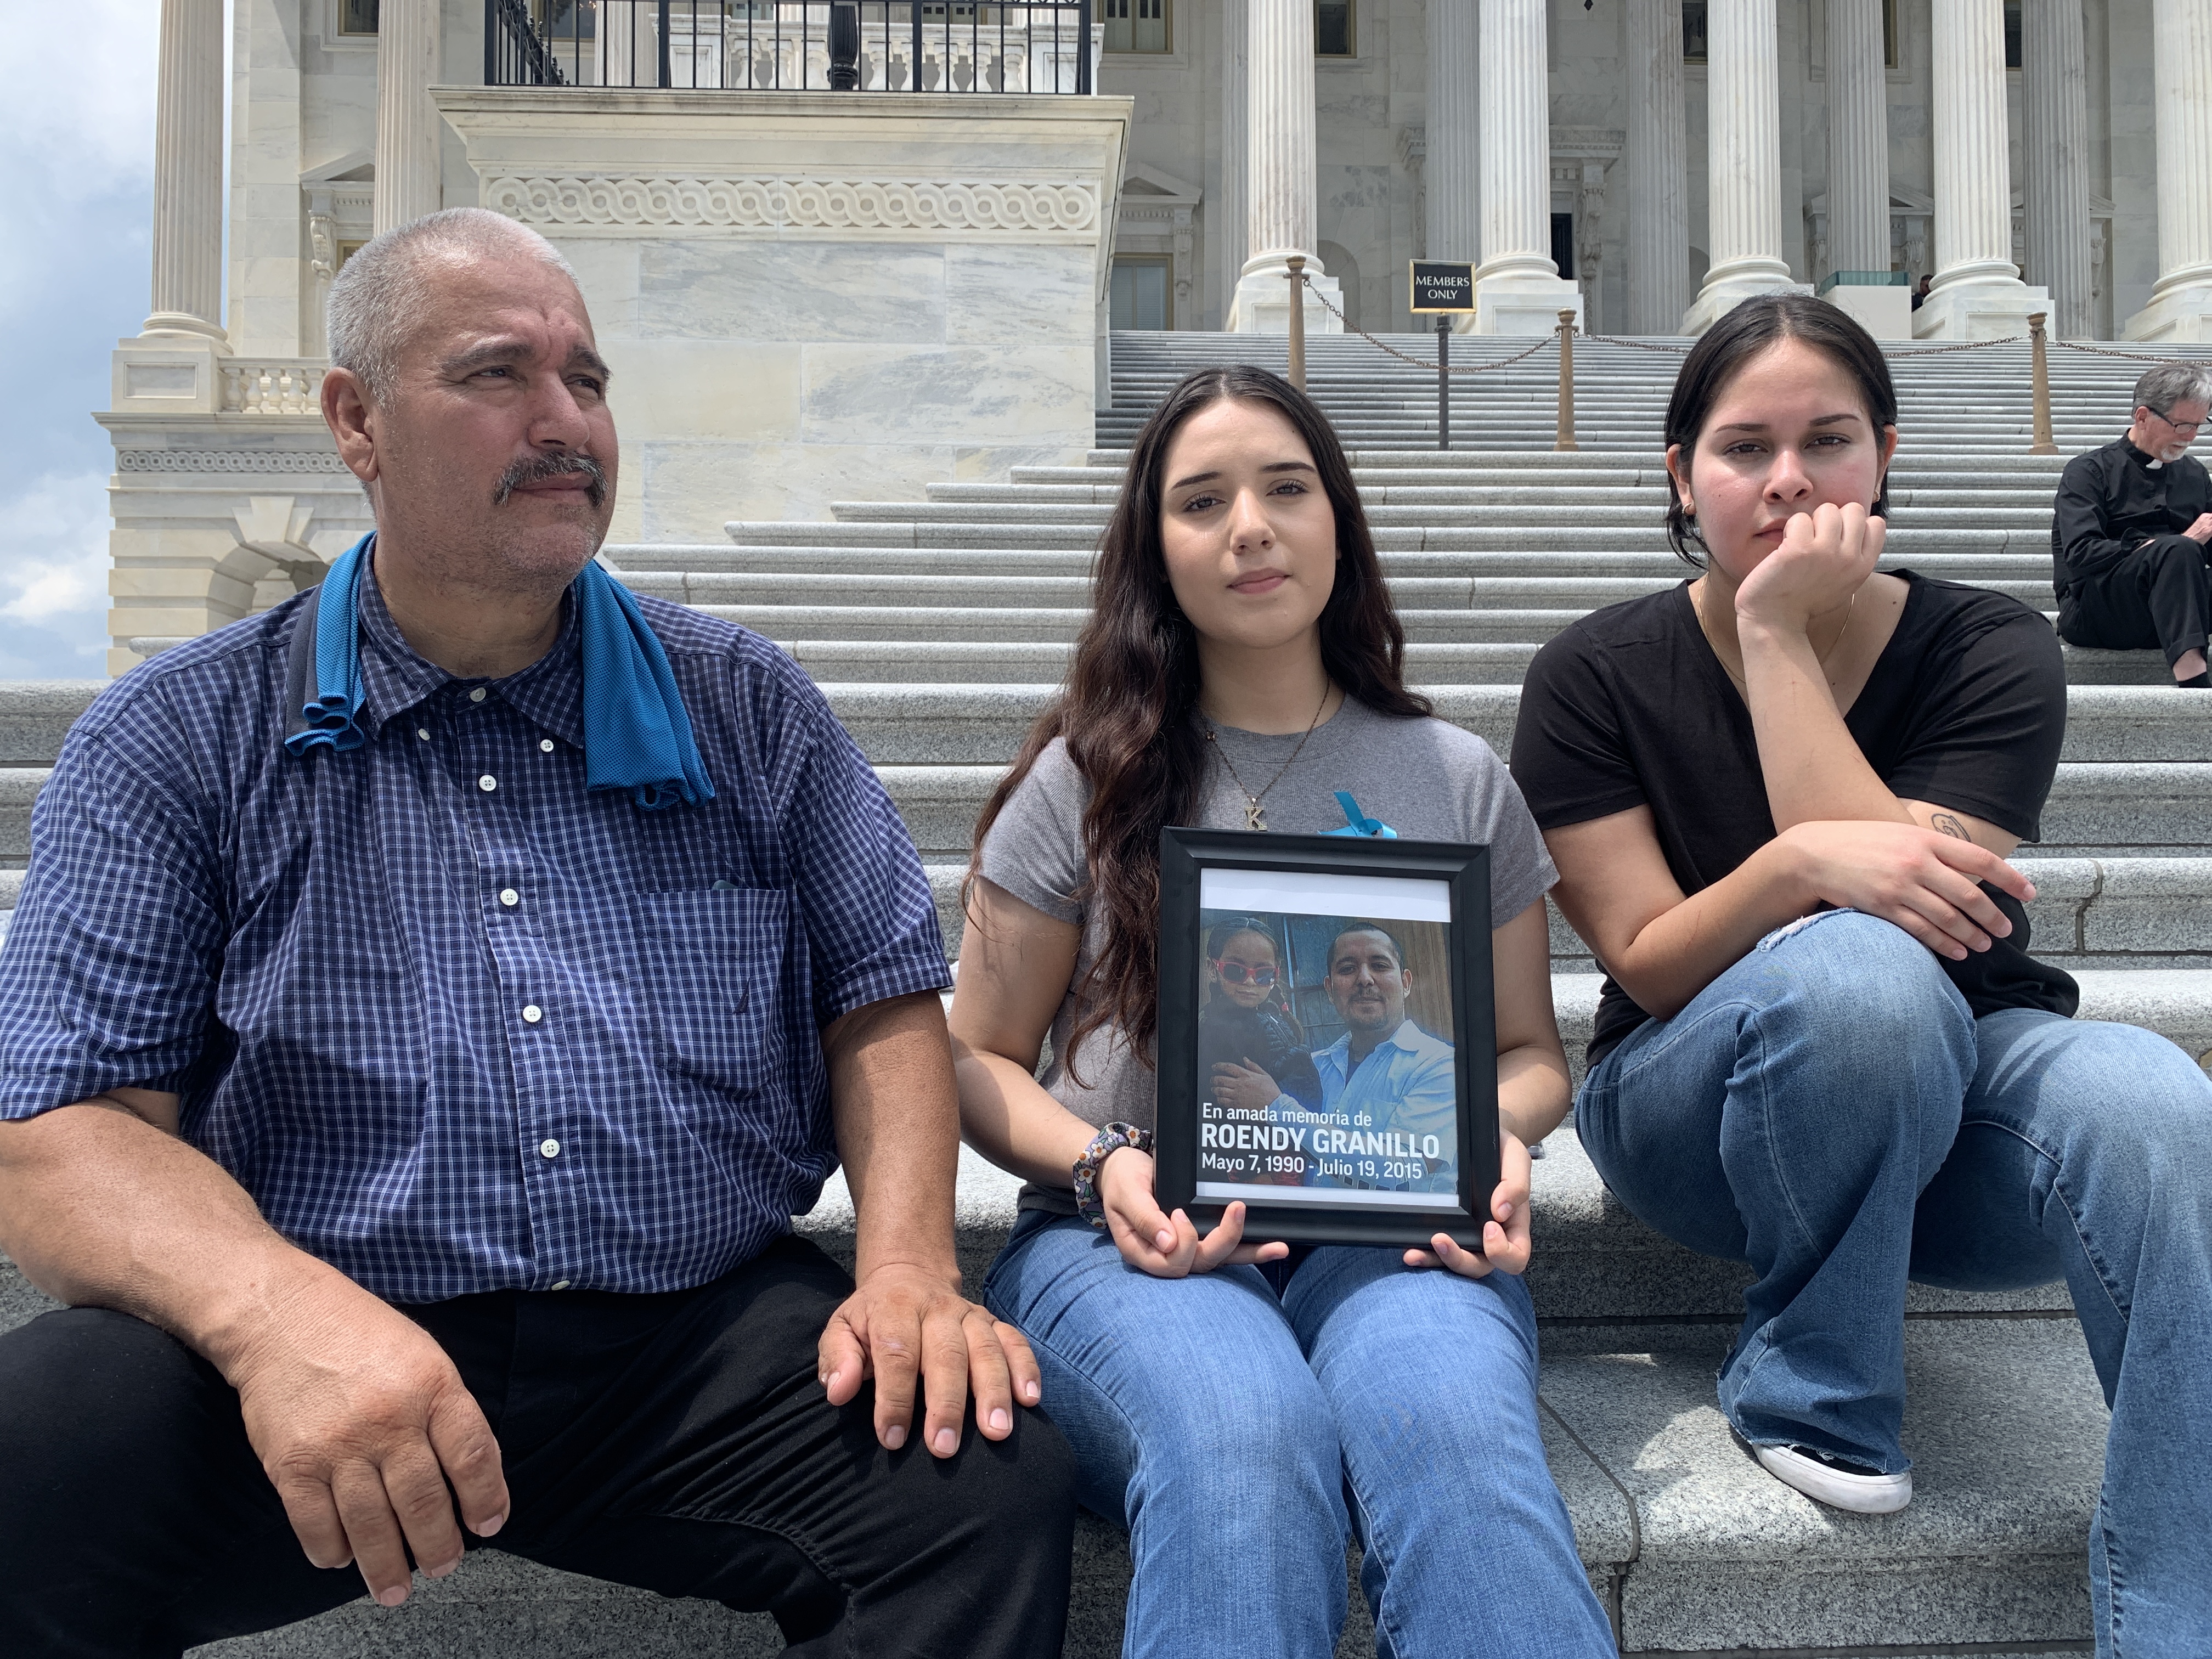 Jasmine and Daisy Granillo sit beside their father on the steps of the U.S. Capitol. Daisy, centered between her two family members, holds a framed photo of her late older brother.